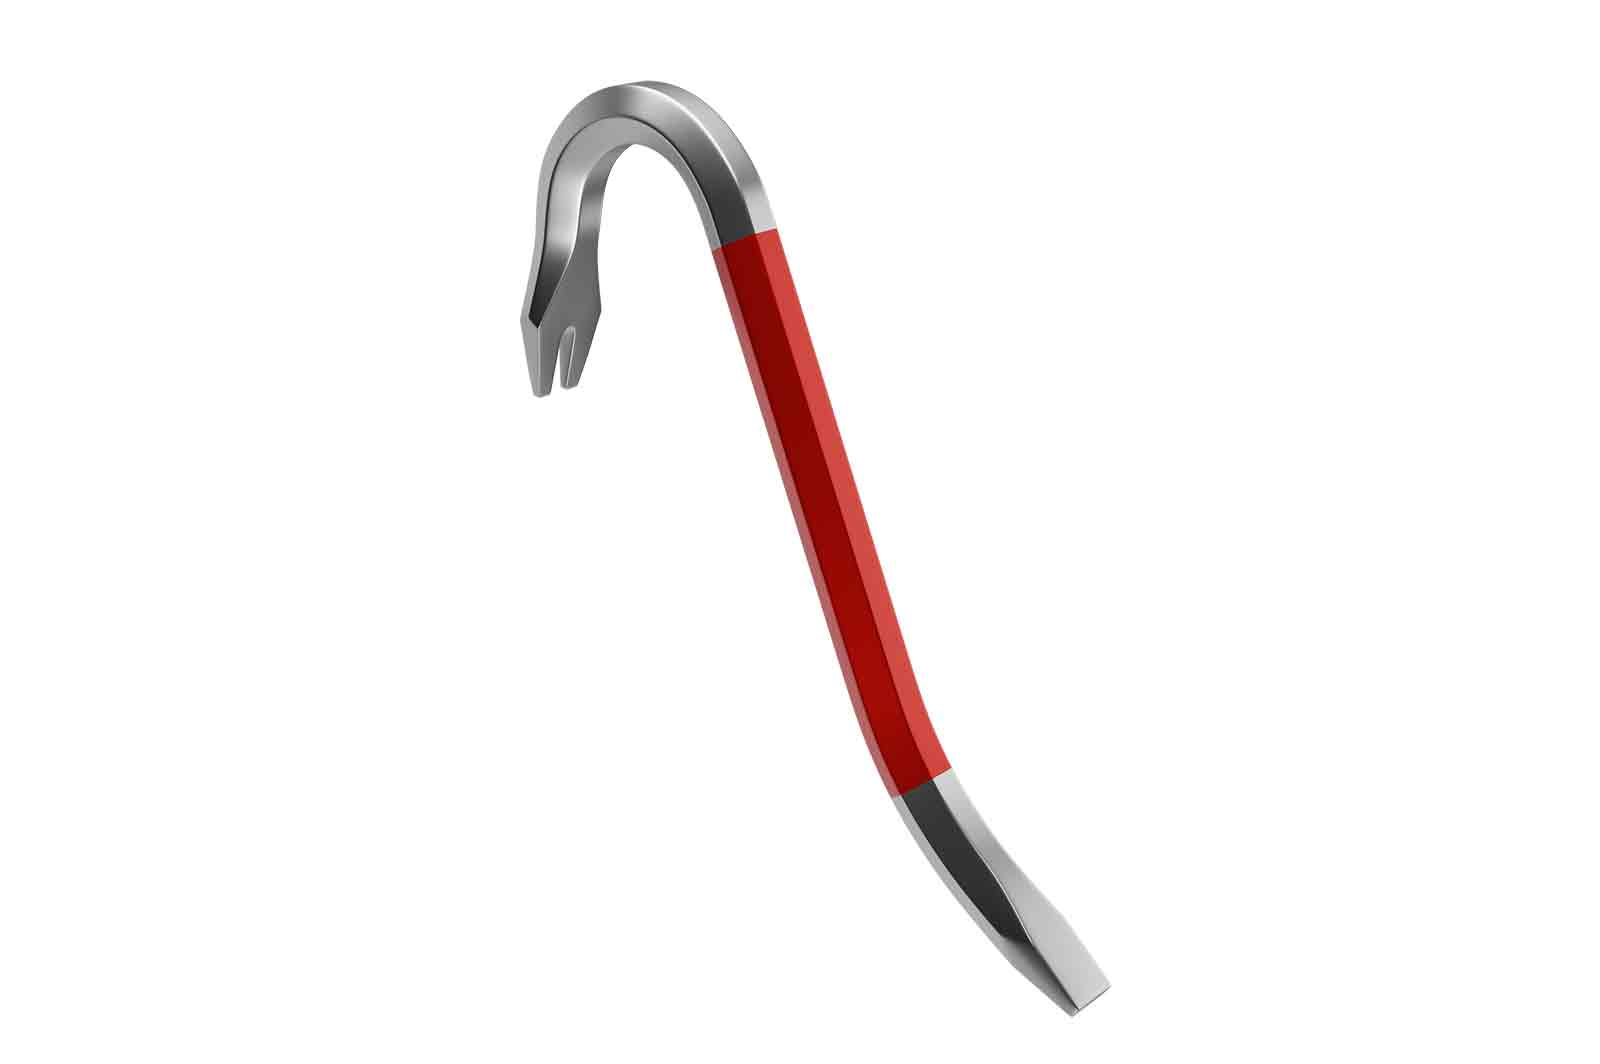 Red and silver crowbar, 3d rendered illustration. A metal bar with a curved end and a flat end, used for prying open or levering objects.